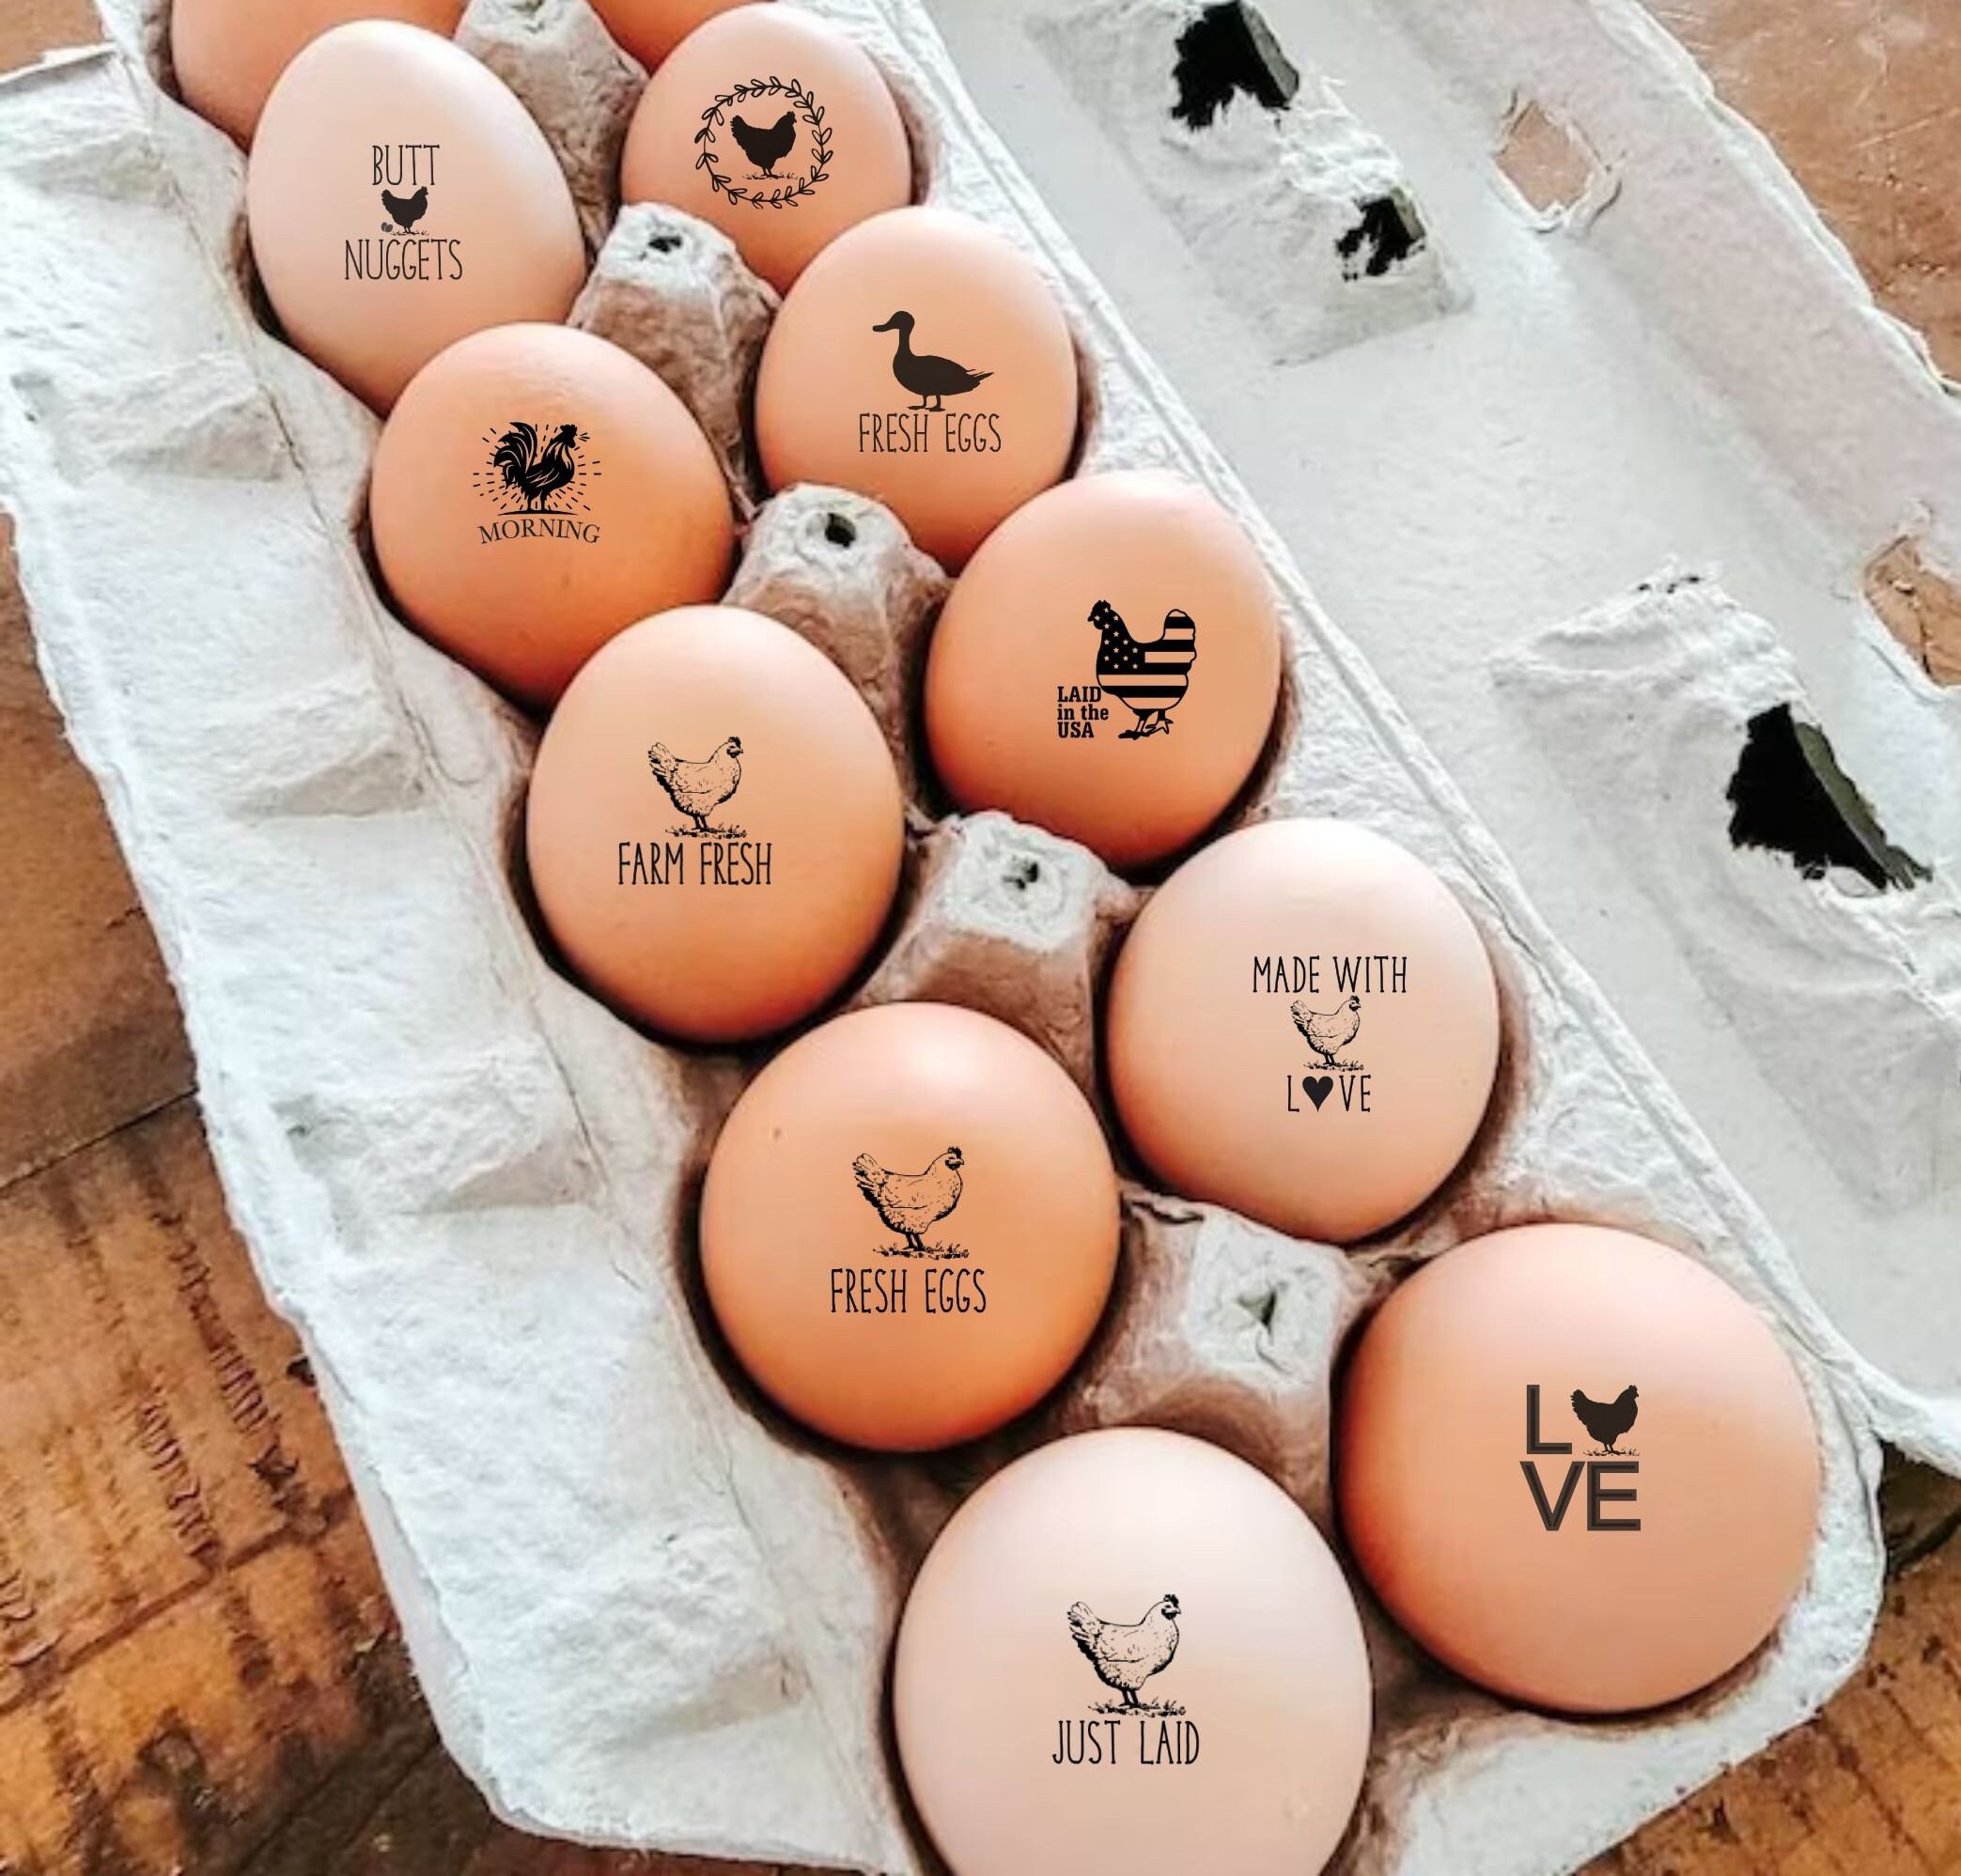  Stamp by Me, Egg Stamp, Chicken Egg Wooden Stamps, Personalized Rubber Stamper for Fresh Eggs, Custom Stamping, Egg Labels, Farm  Stamp, Self Inking